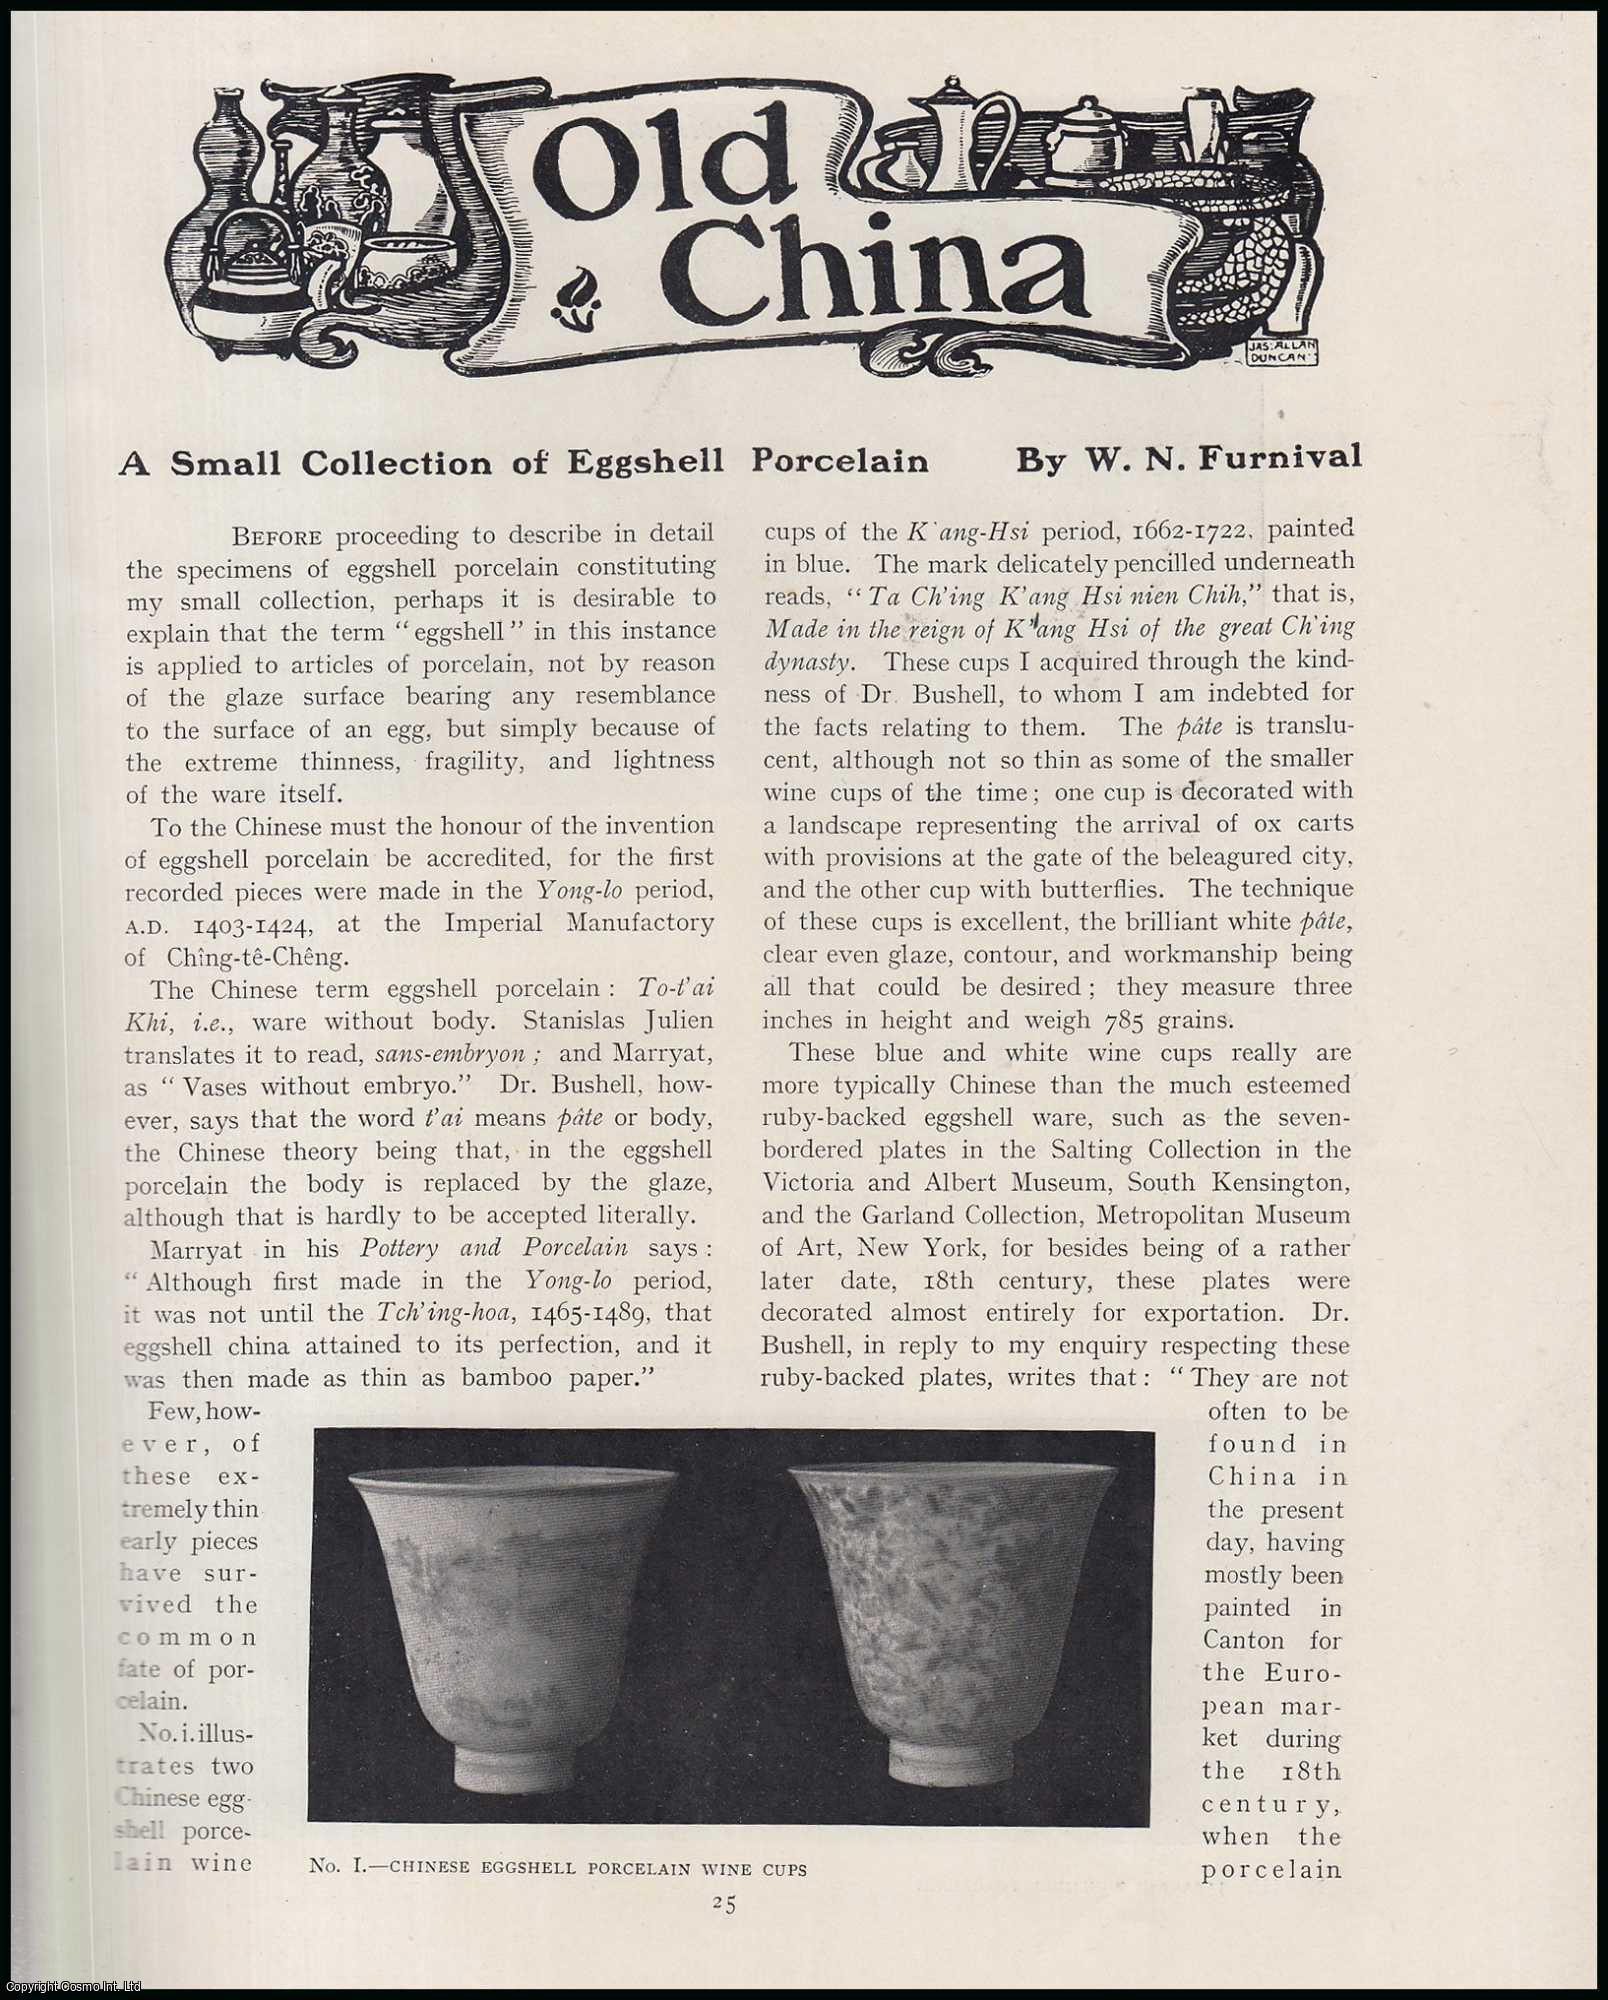 W.N. Furnival - A Small Collection of Eggshell Porcelain. An original article from The Connoisseur, 1905.